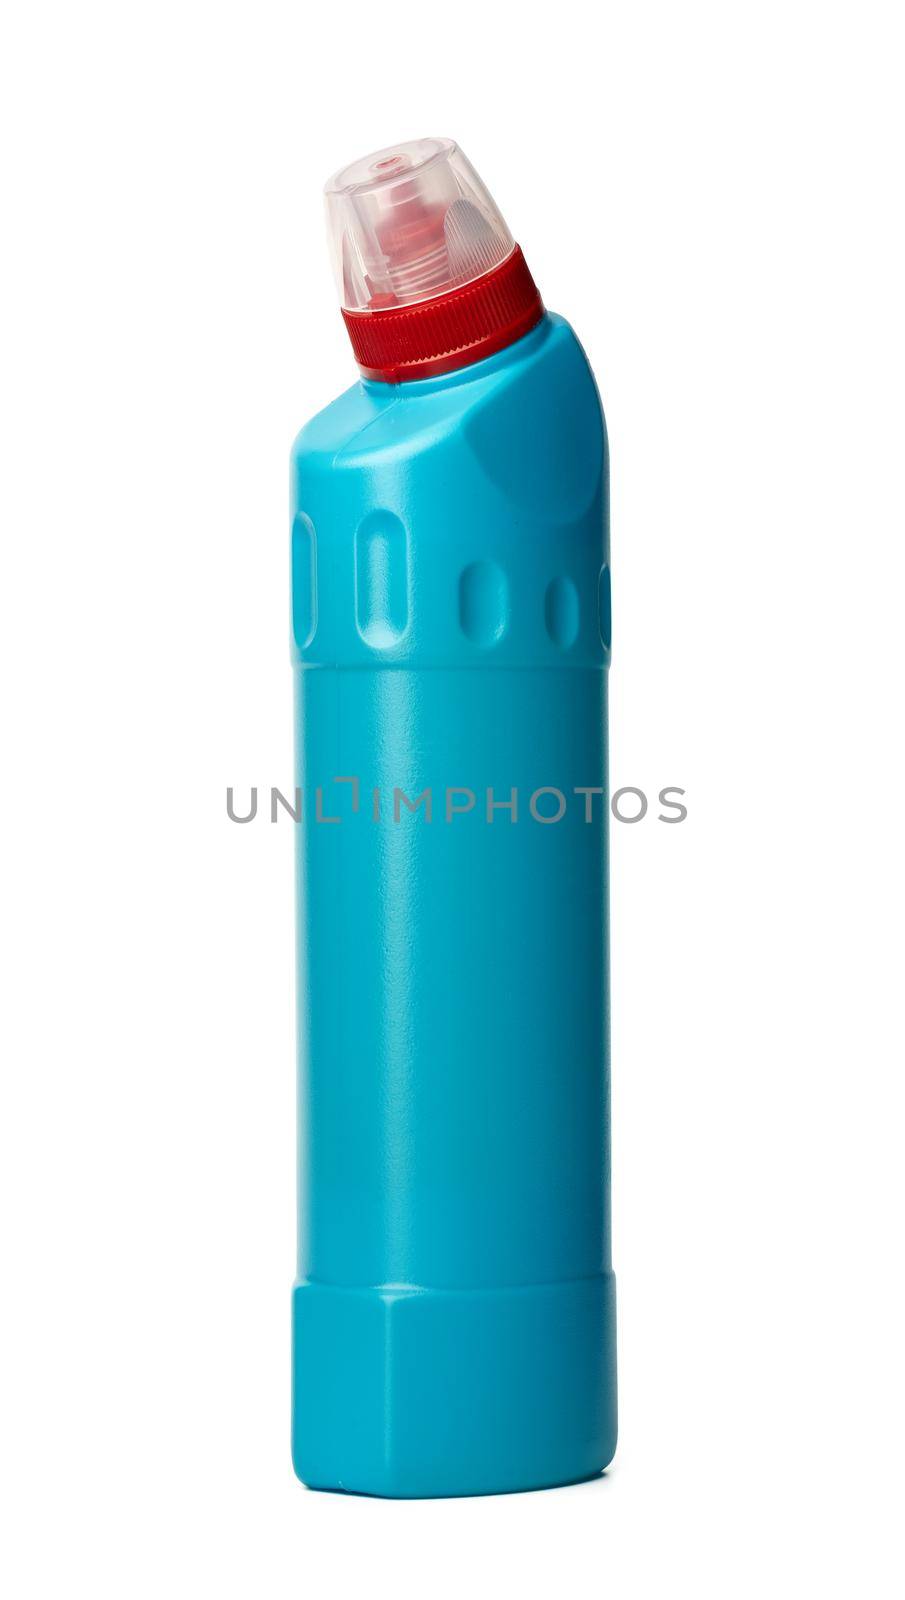 Blue plastic bottle of liquid detergent isolated on white by Fabrikasimf